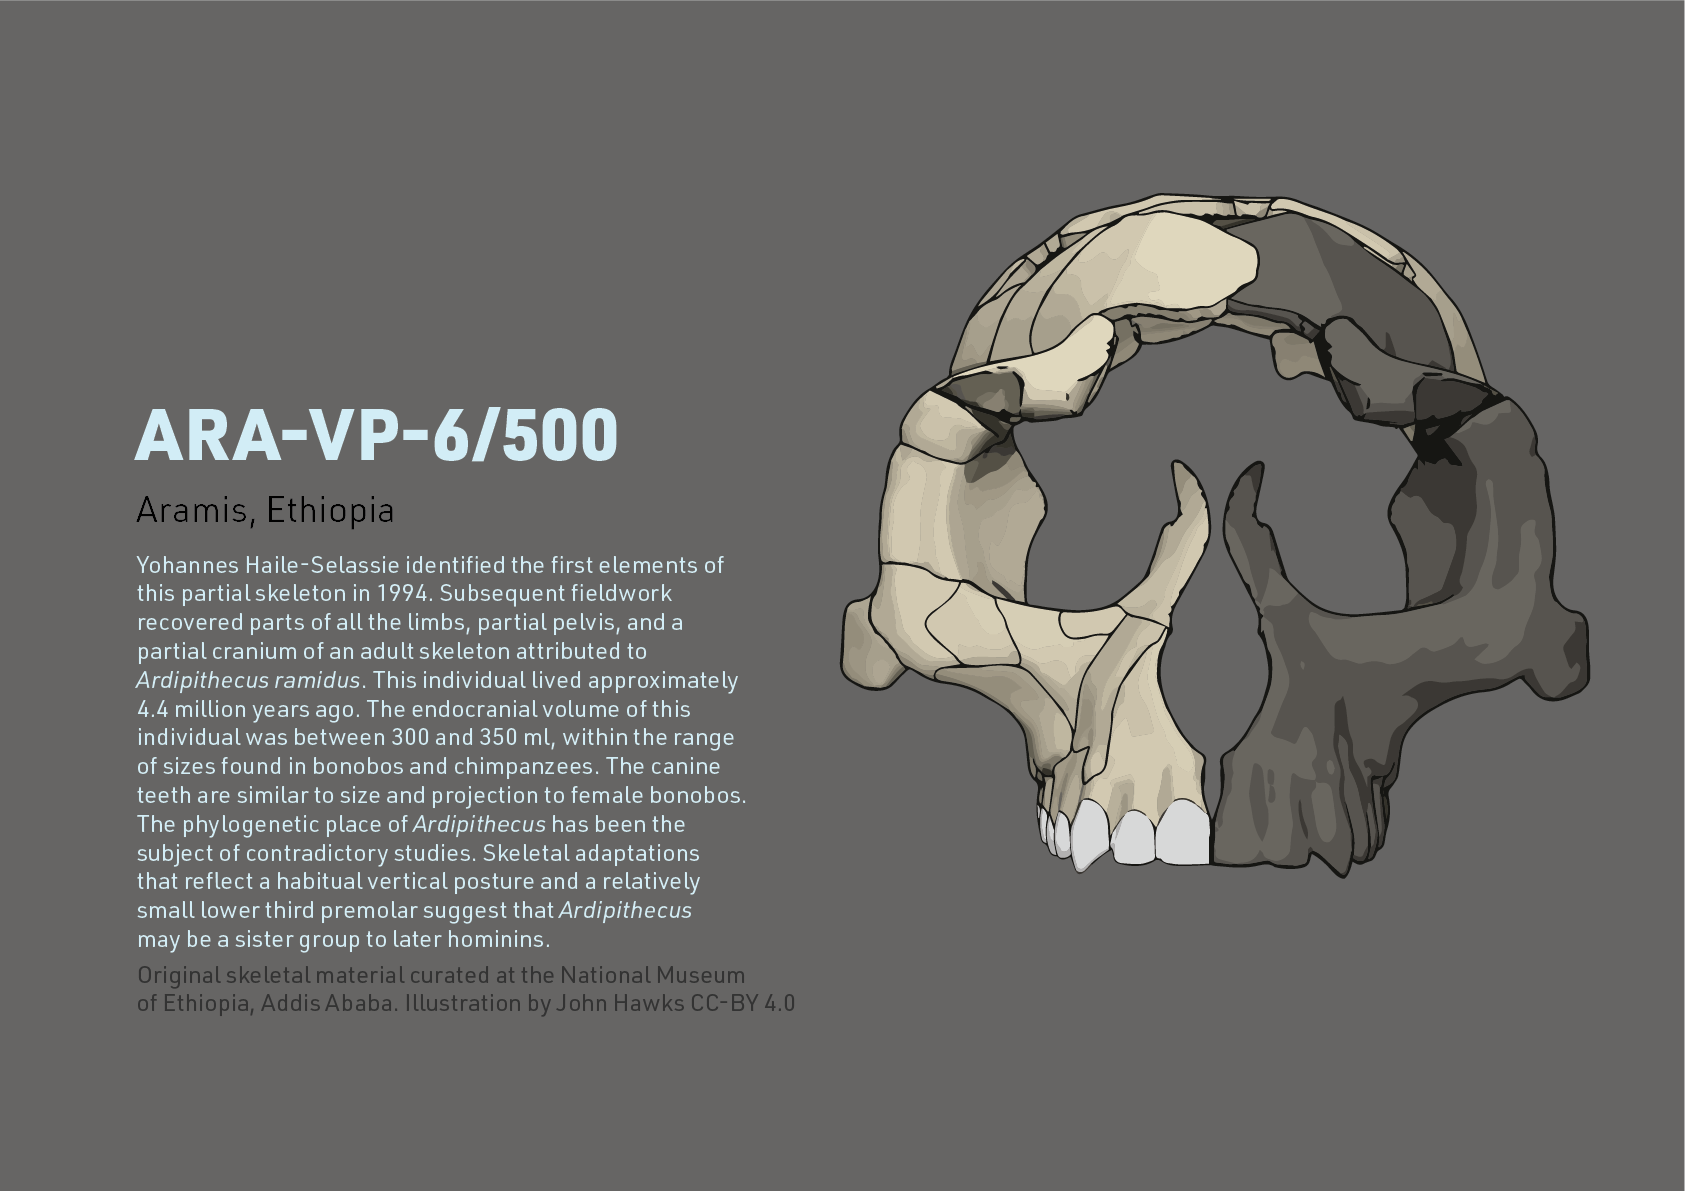 Fact sheet with information about the ARA-VP-6/500 cranium of Ar. ramidus